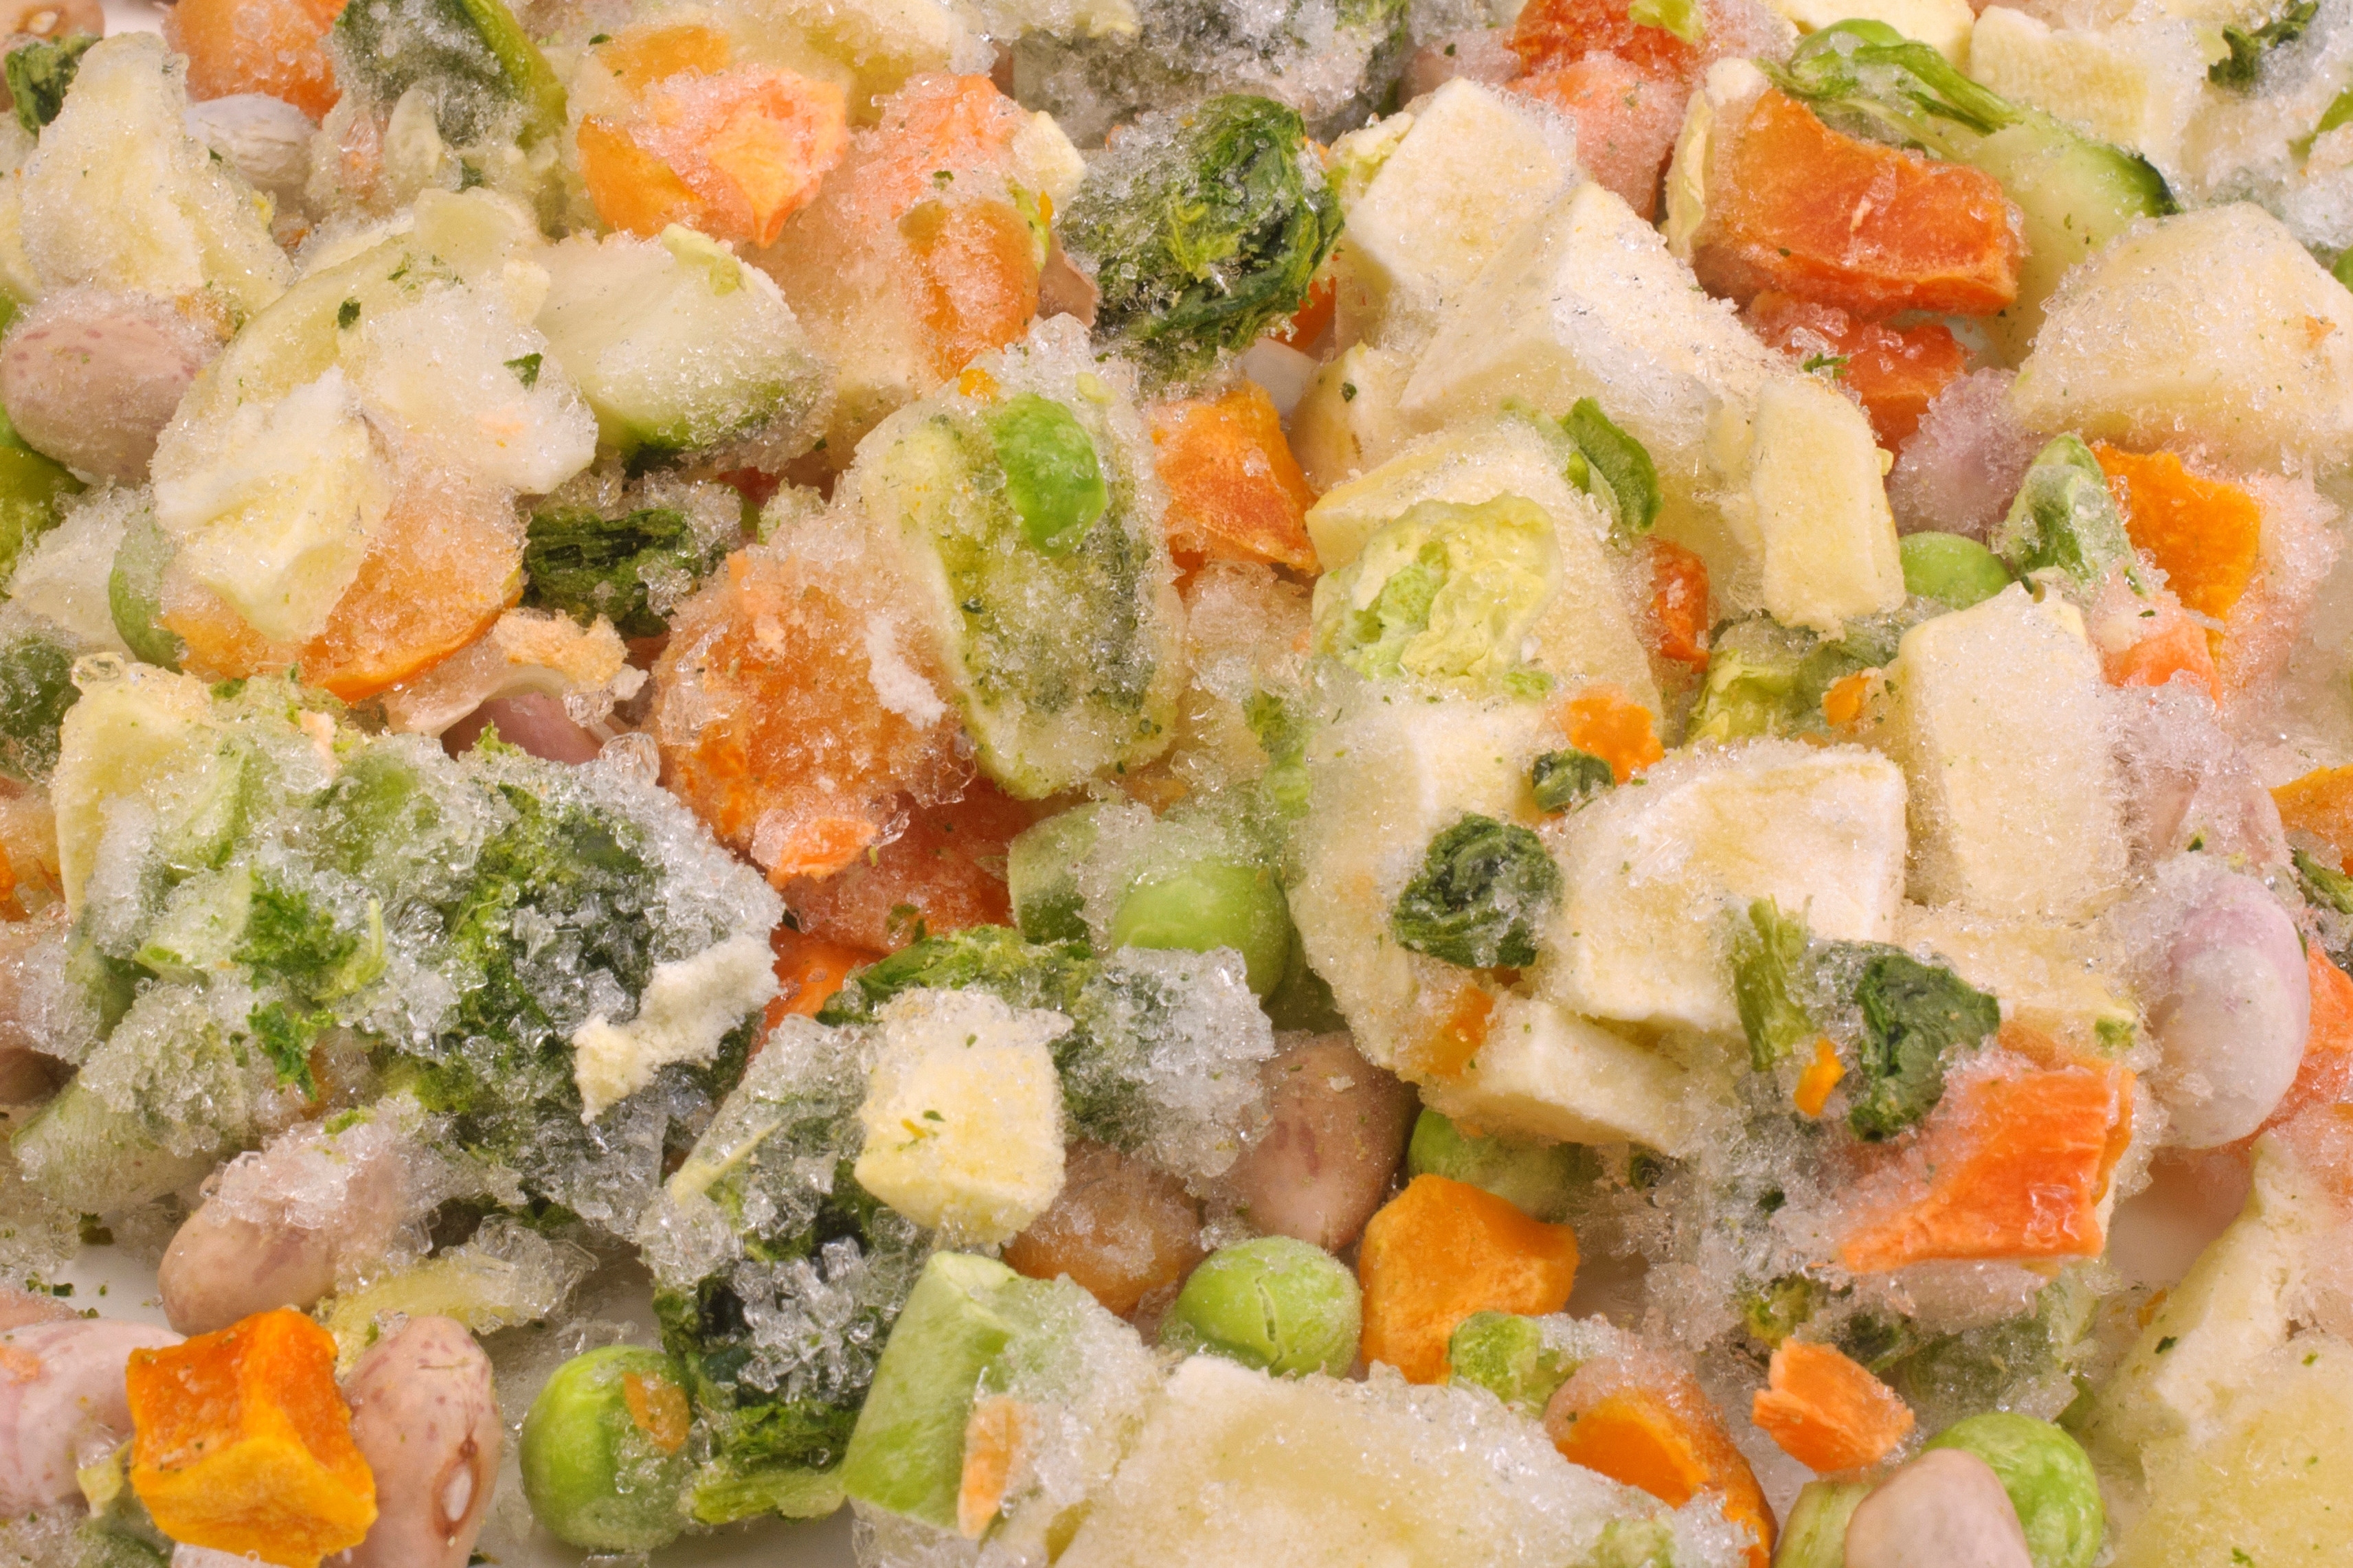 A Bunch of Frozen Vegetables from Costco &amp; Meijer Were Just Recalled